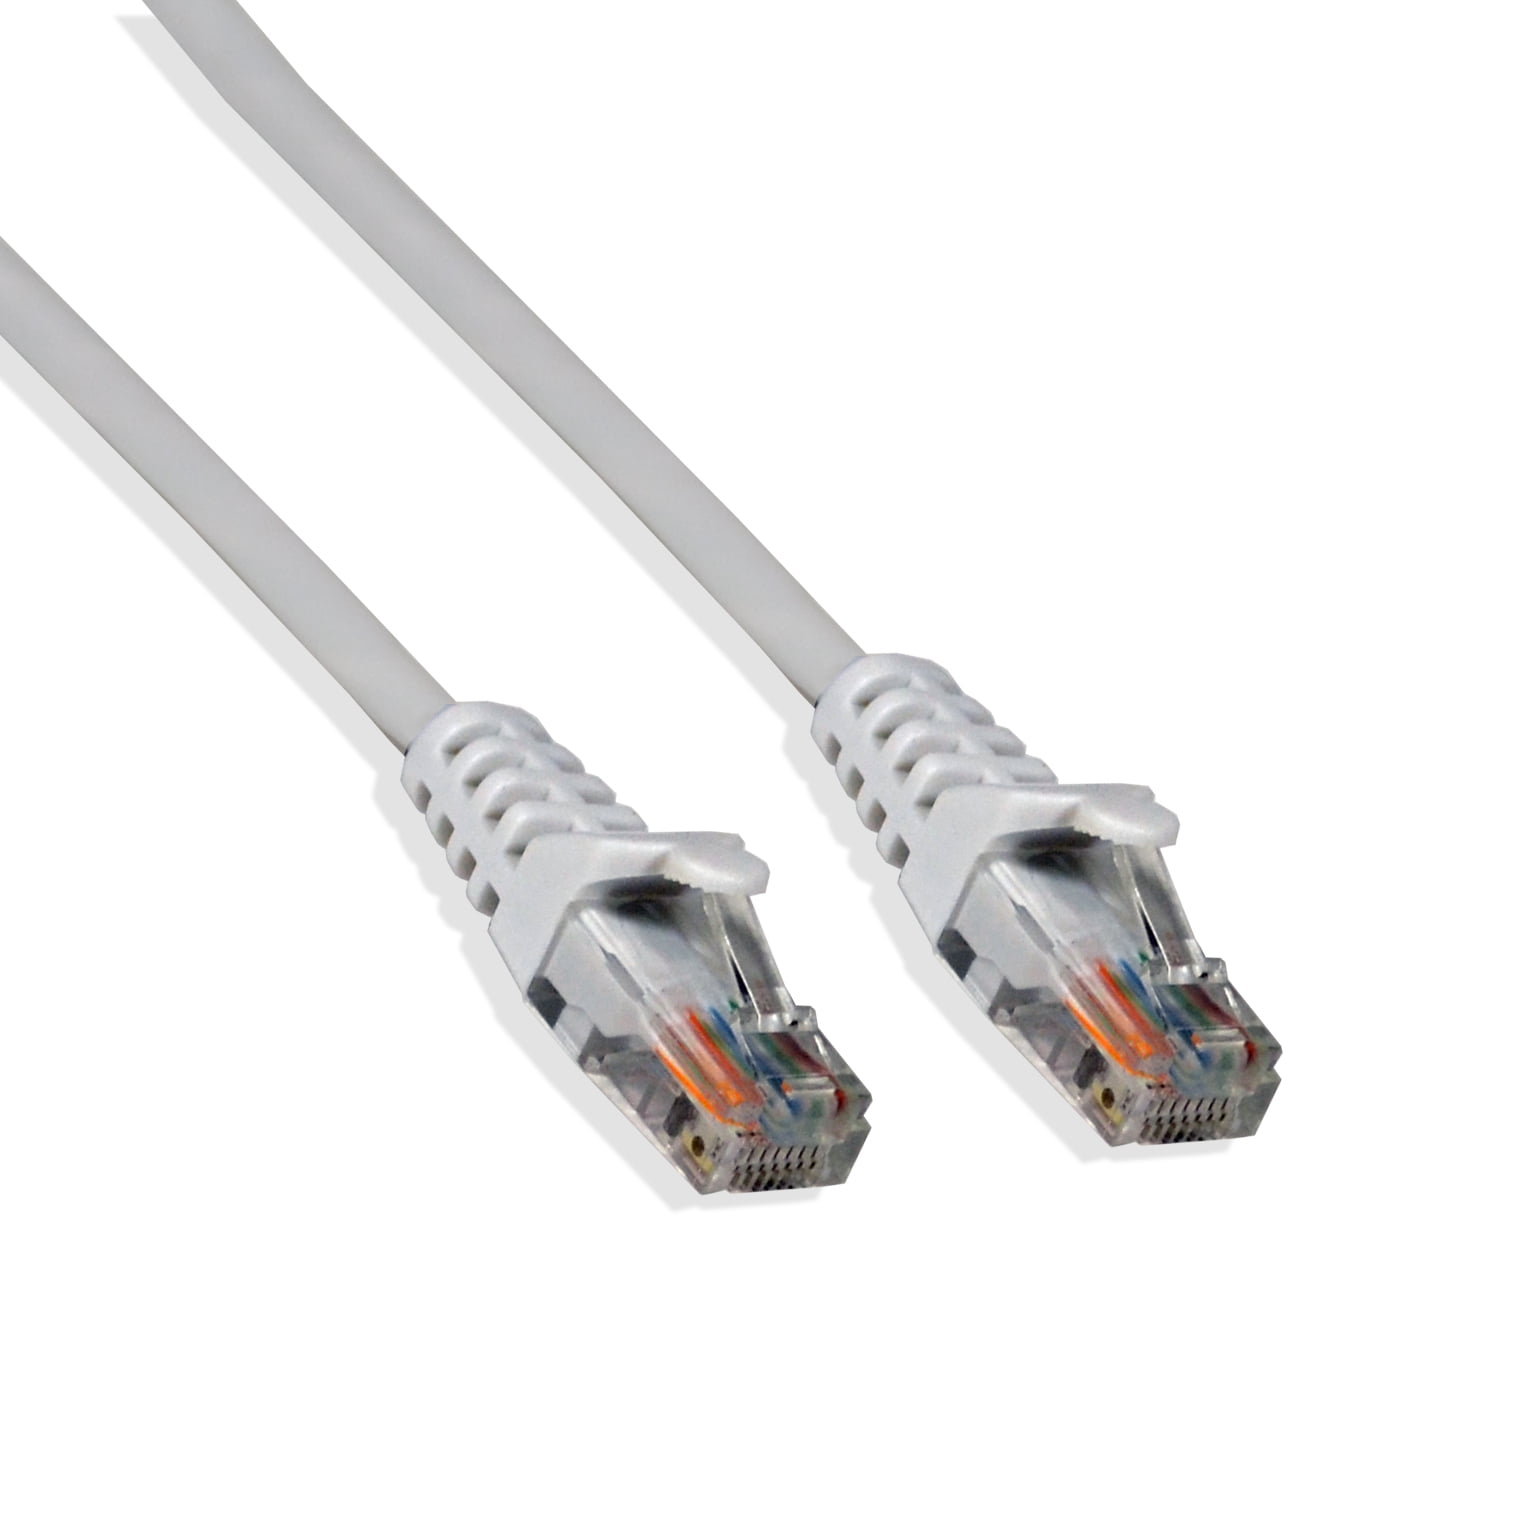 J&D Ethernet Extension Cable, Cat 6 Ethernet Extender Cable Adapter (9  Feet) Support Cat6 / Cat5e / Cat5 Standards, RJ45 Cords Shielded Male to  Female